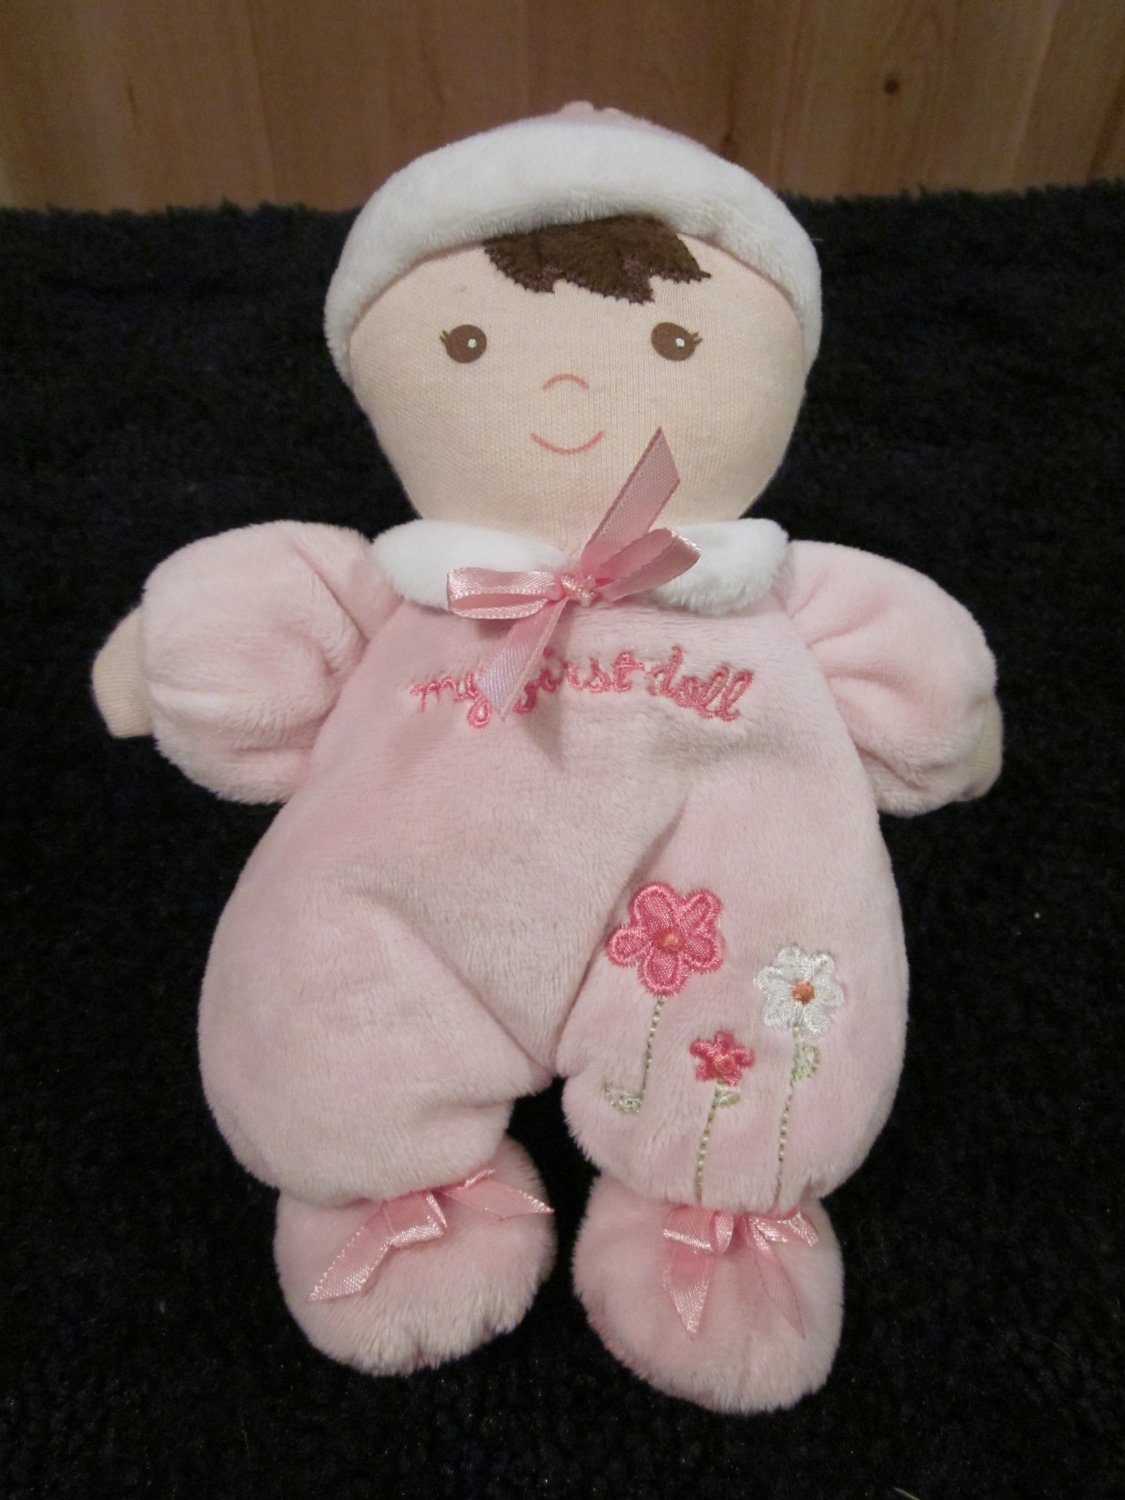 Carters doll